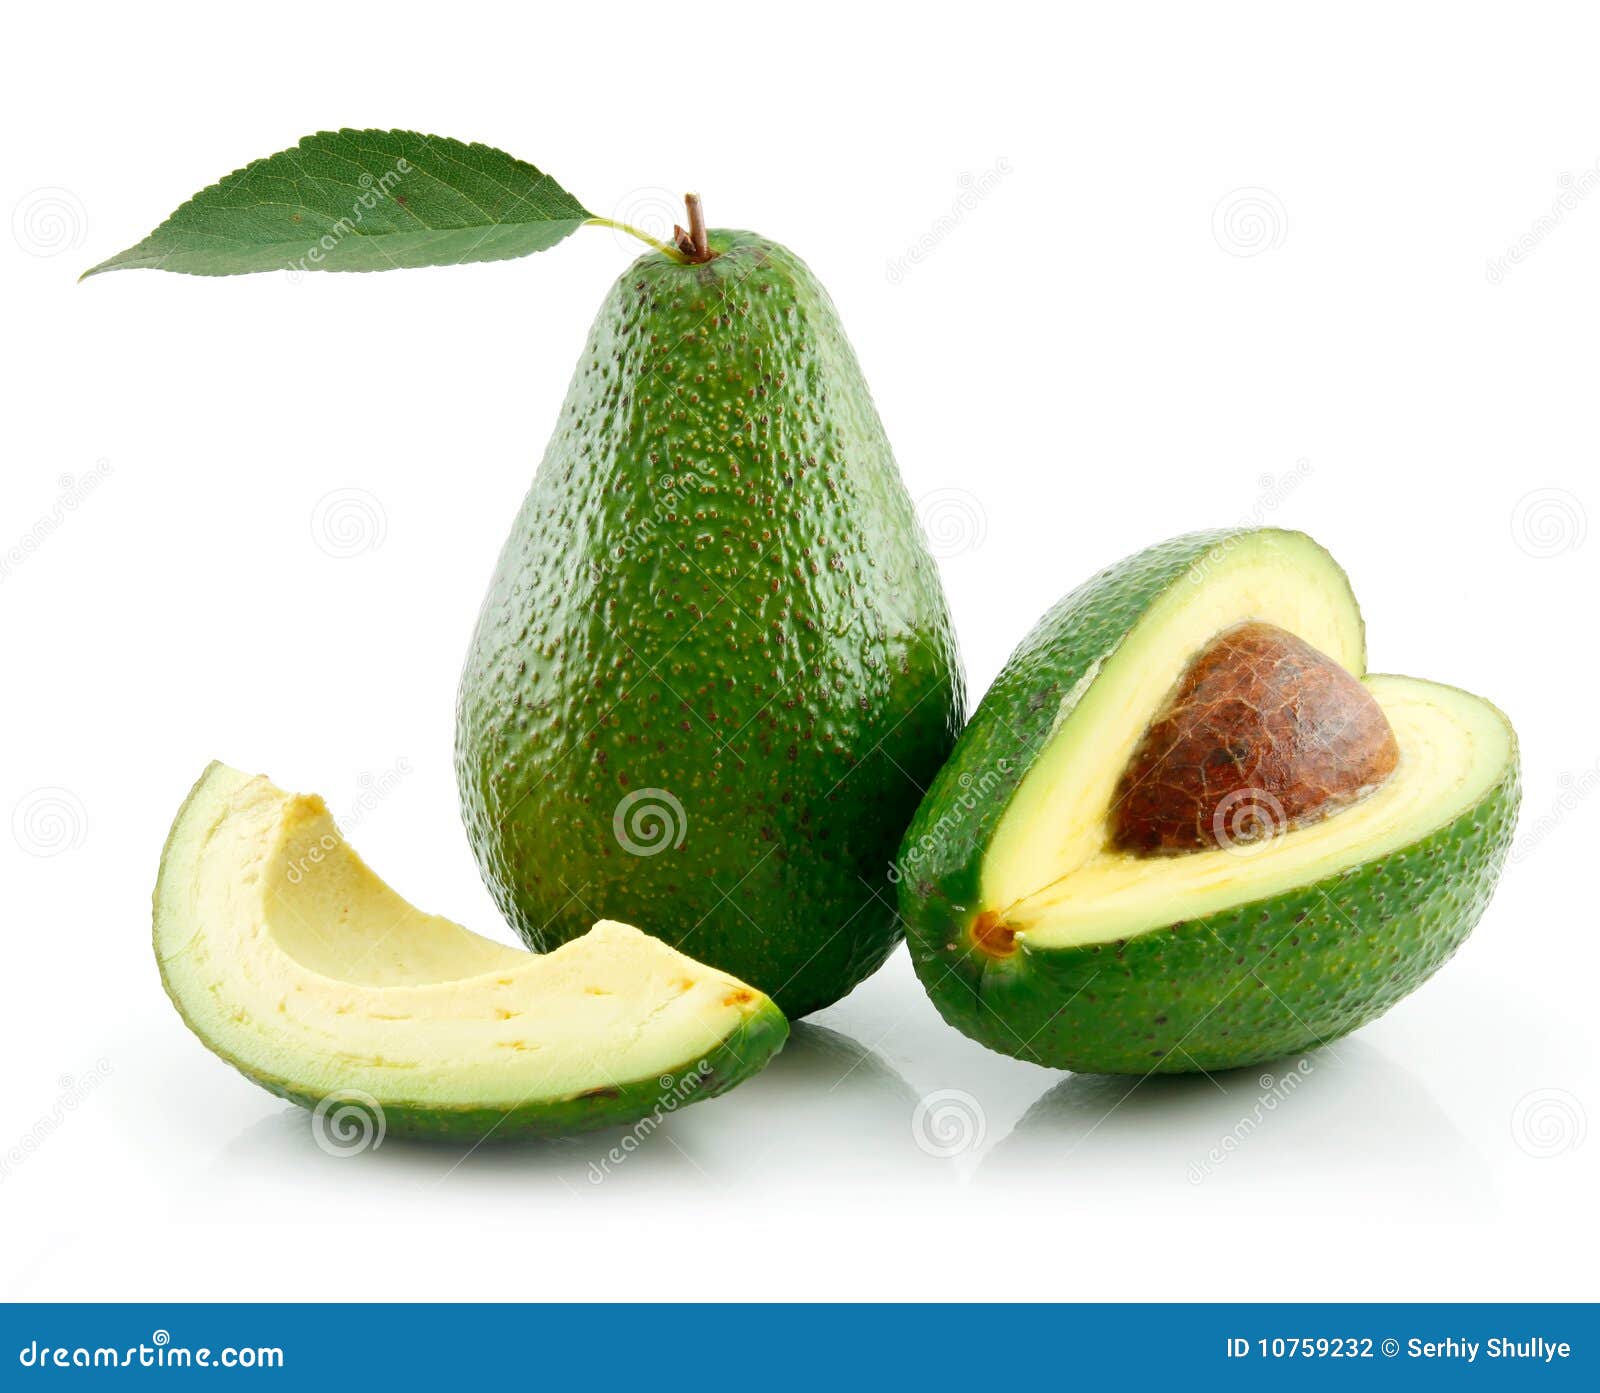 ripe avocado with green leaf  on white